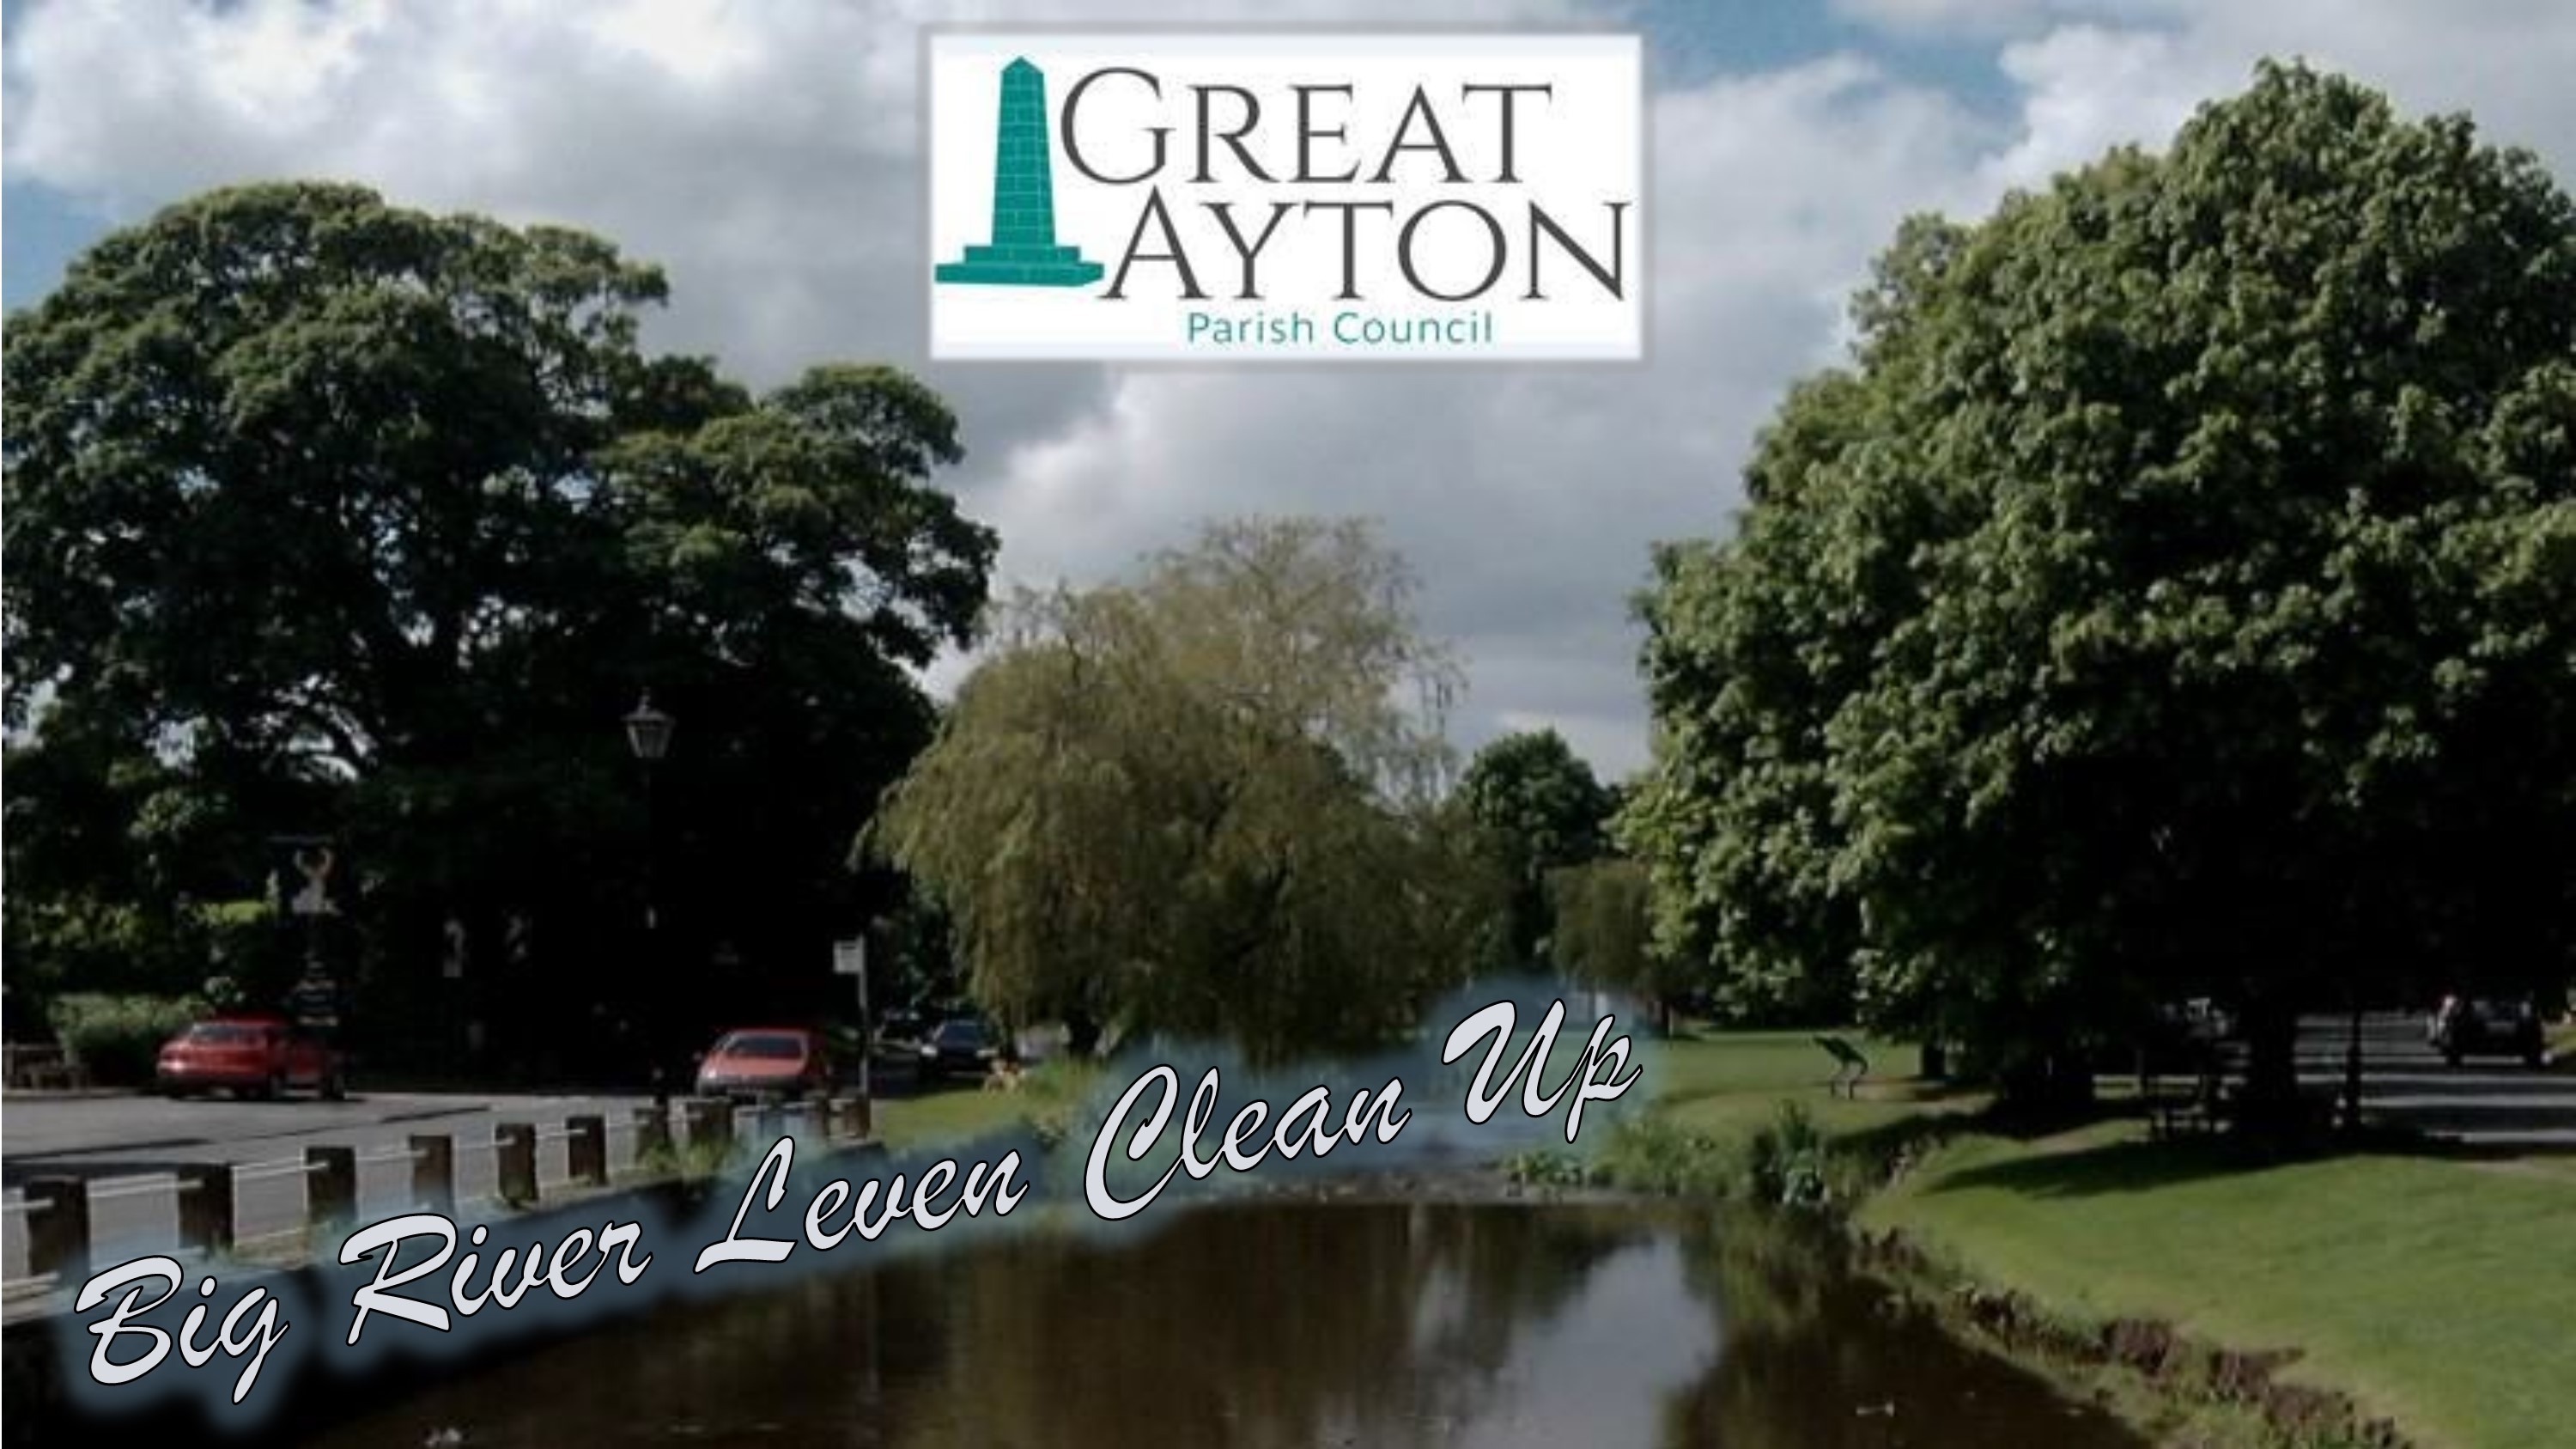 great-ayton-the-big-river-leven-clean-up